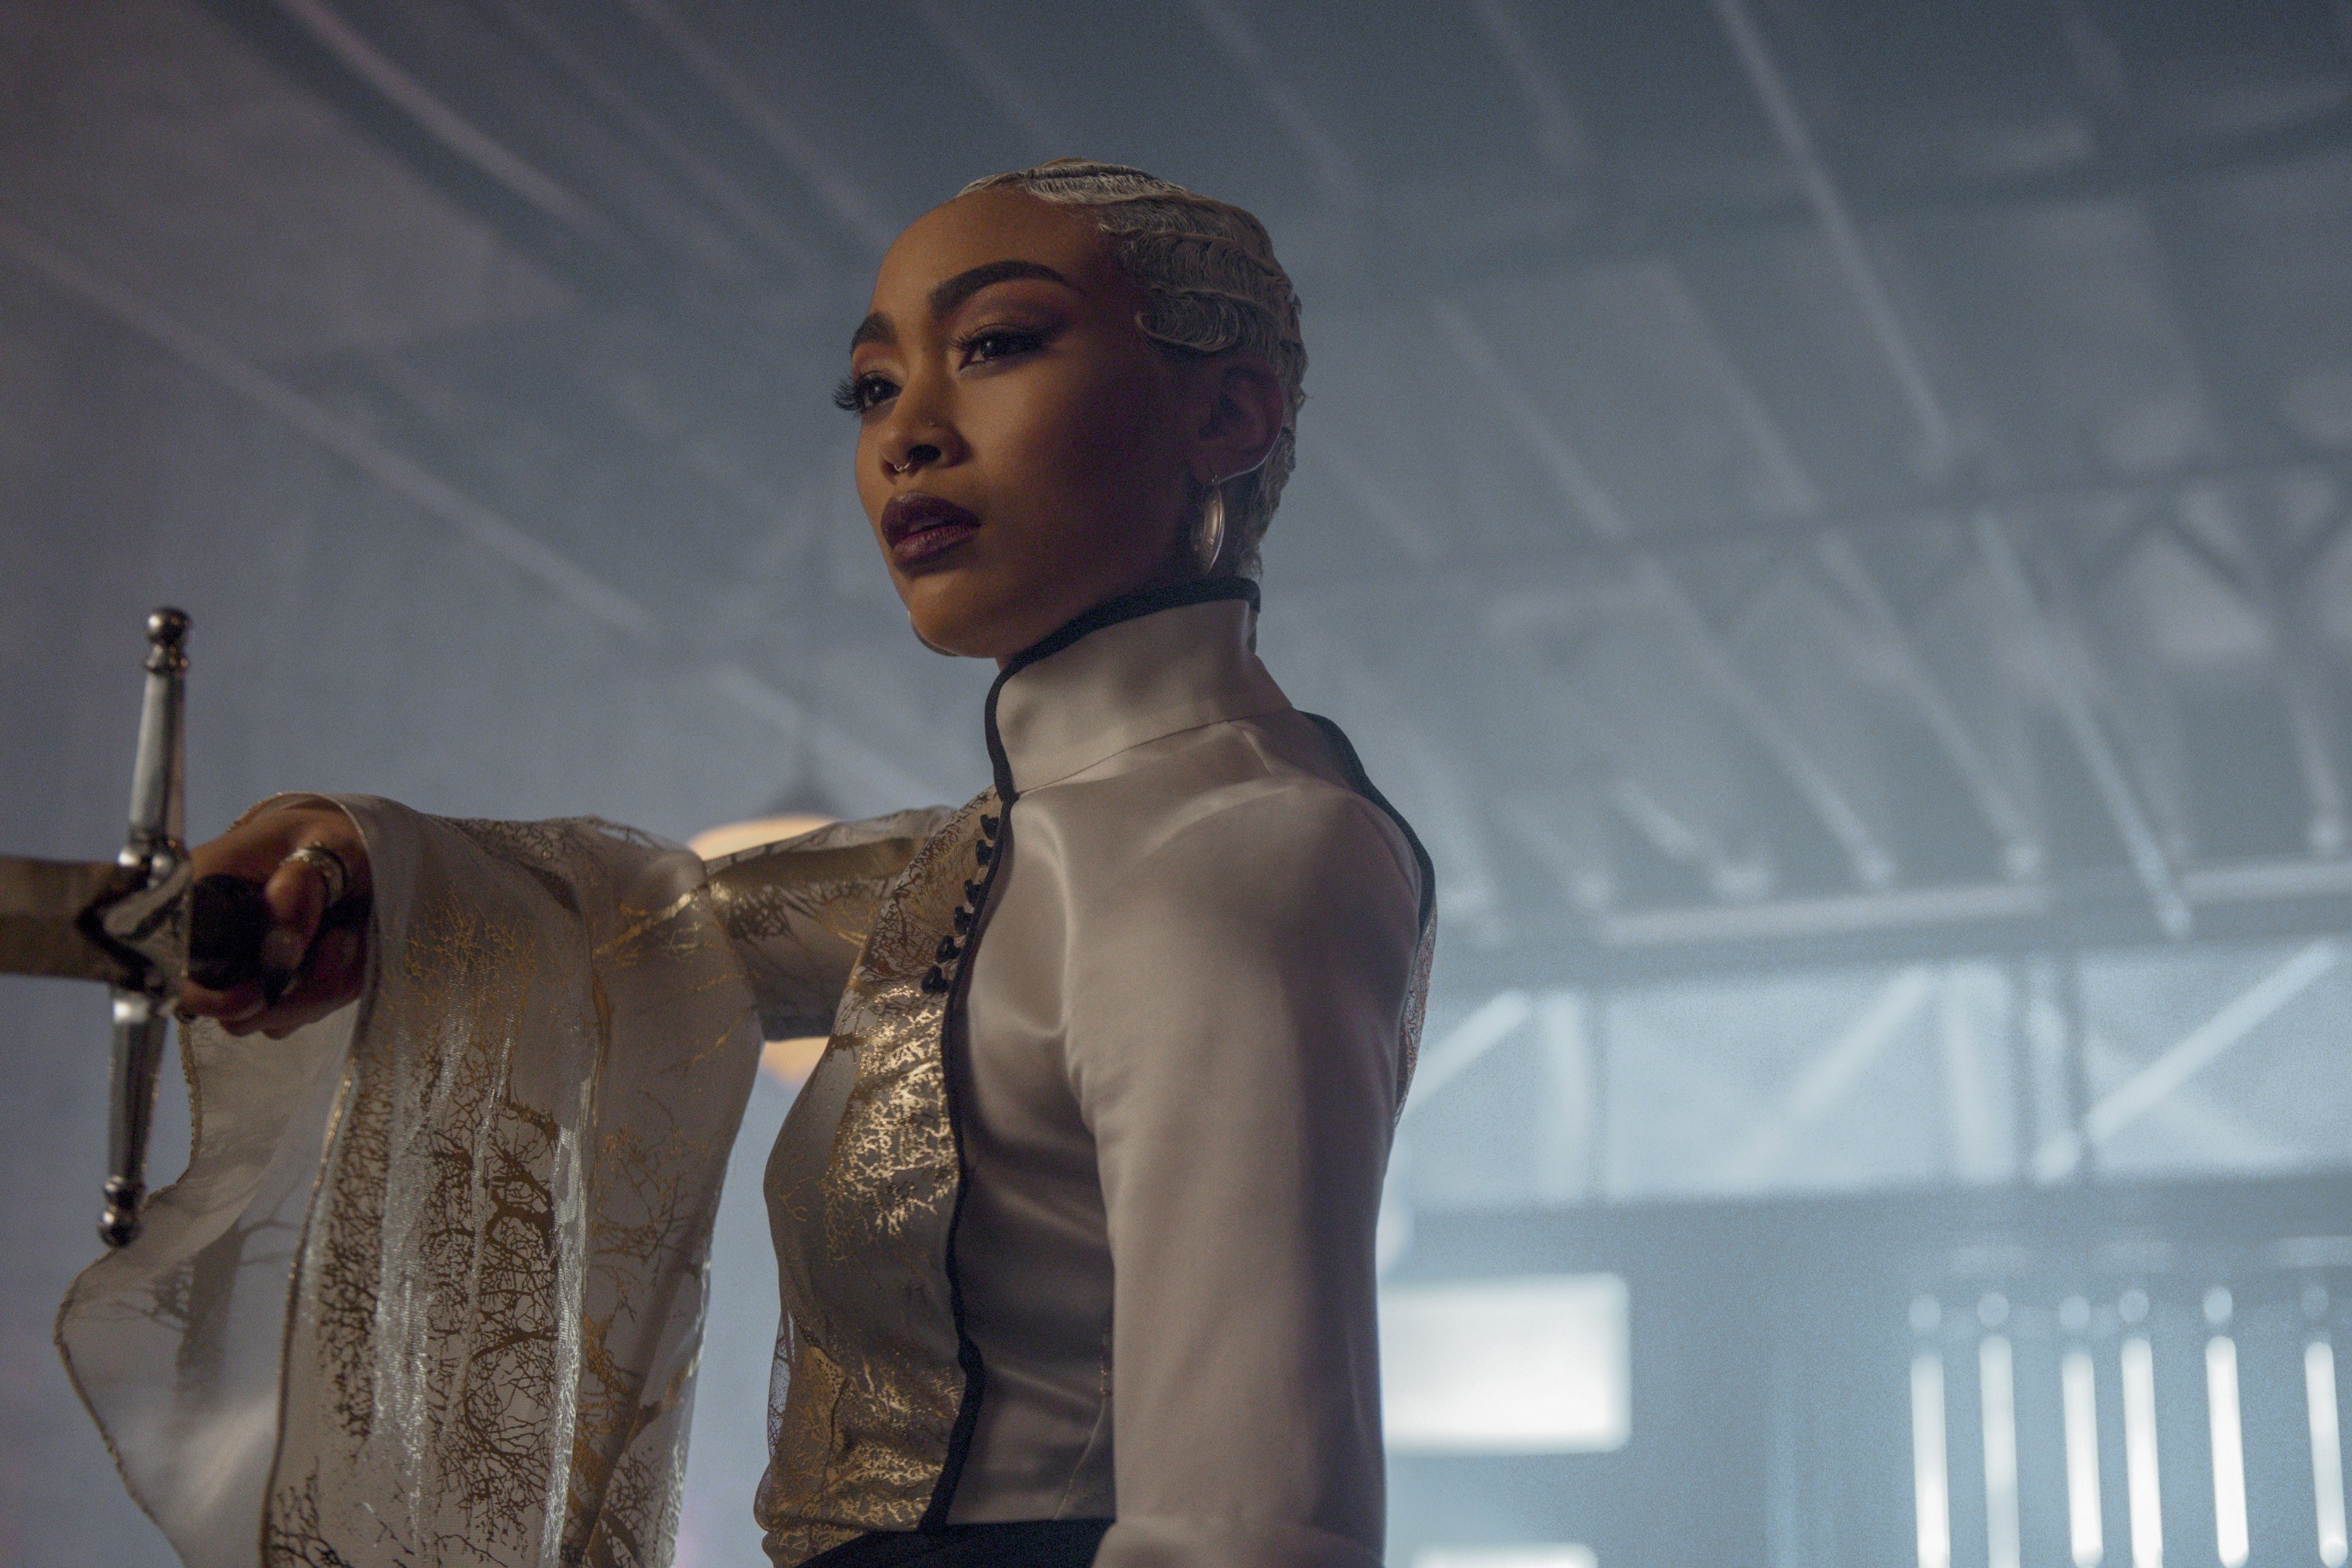 Tati Gabrielle On Uncharted And Growing Up With Zendaya